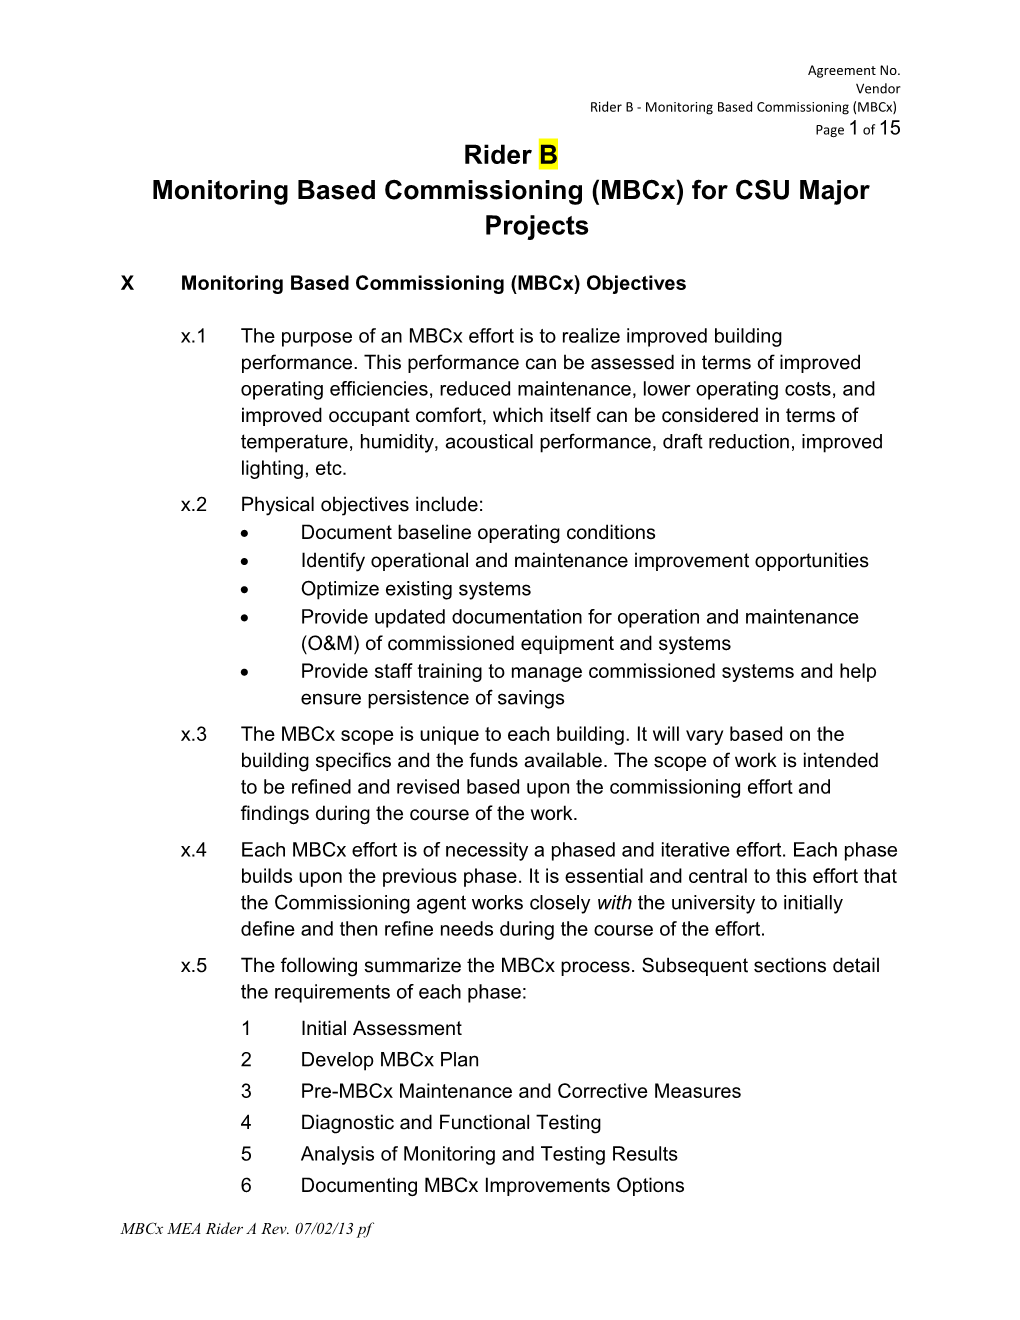 Monitoring Based Commissioning (Mbcx) for CSU Major Projects